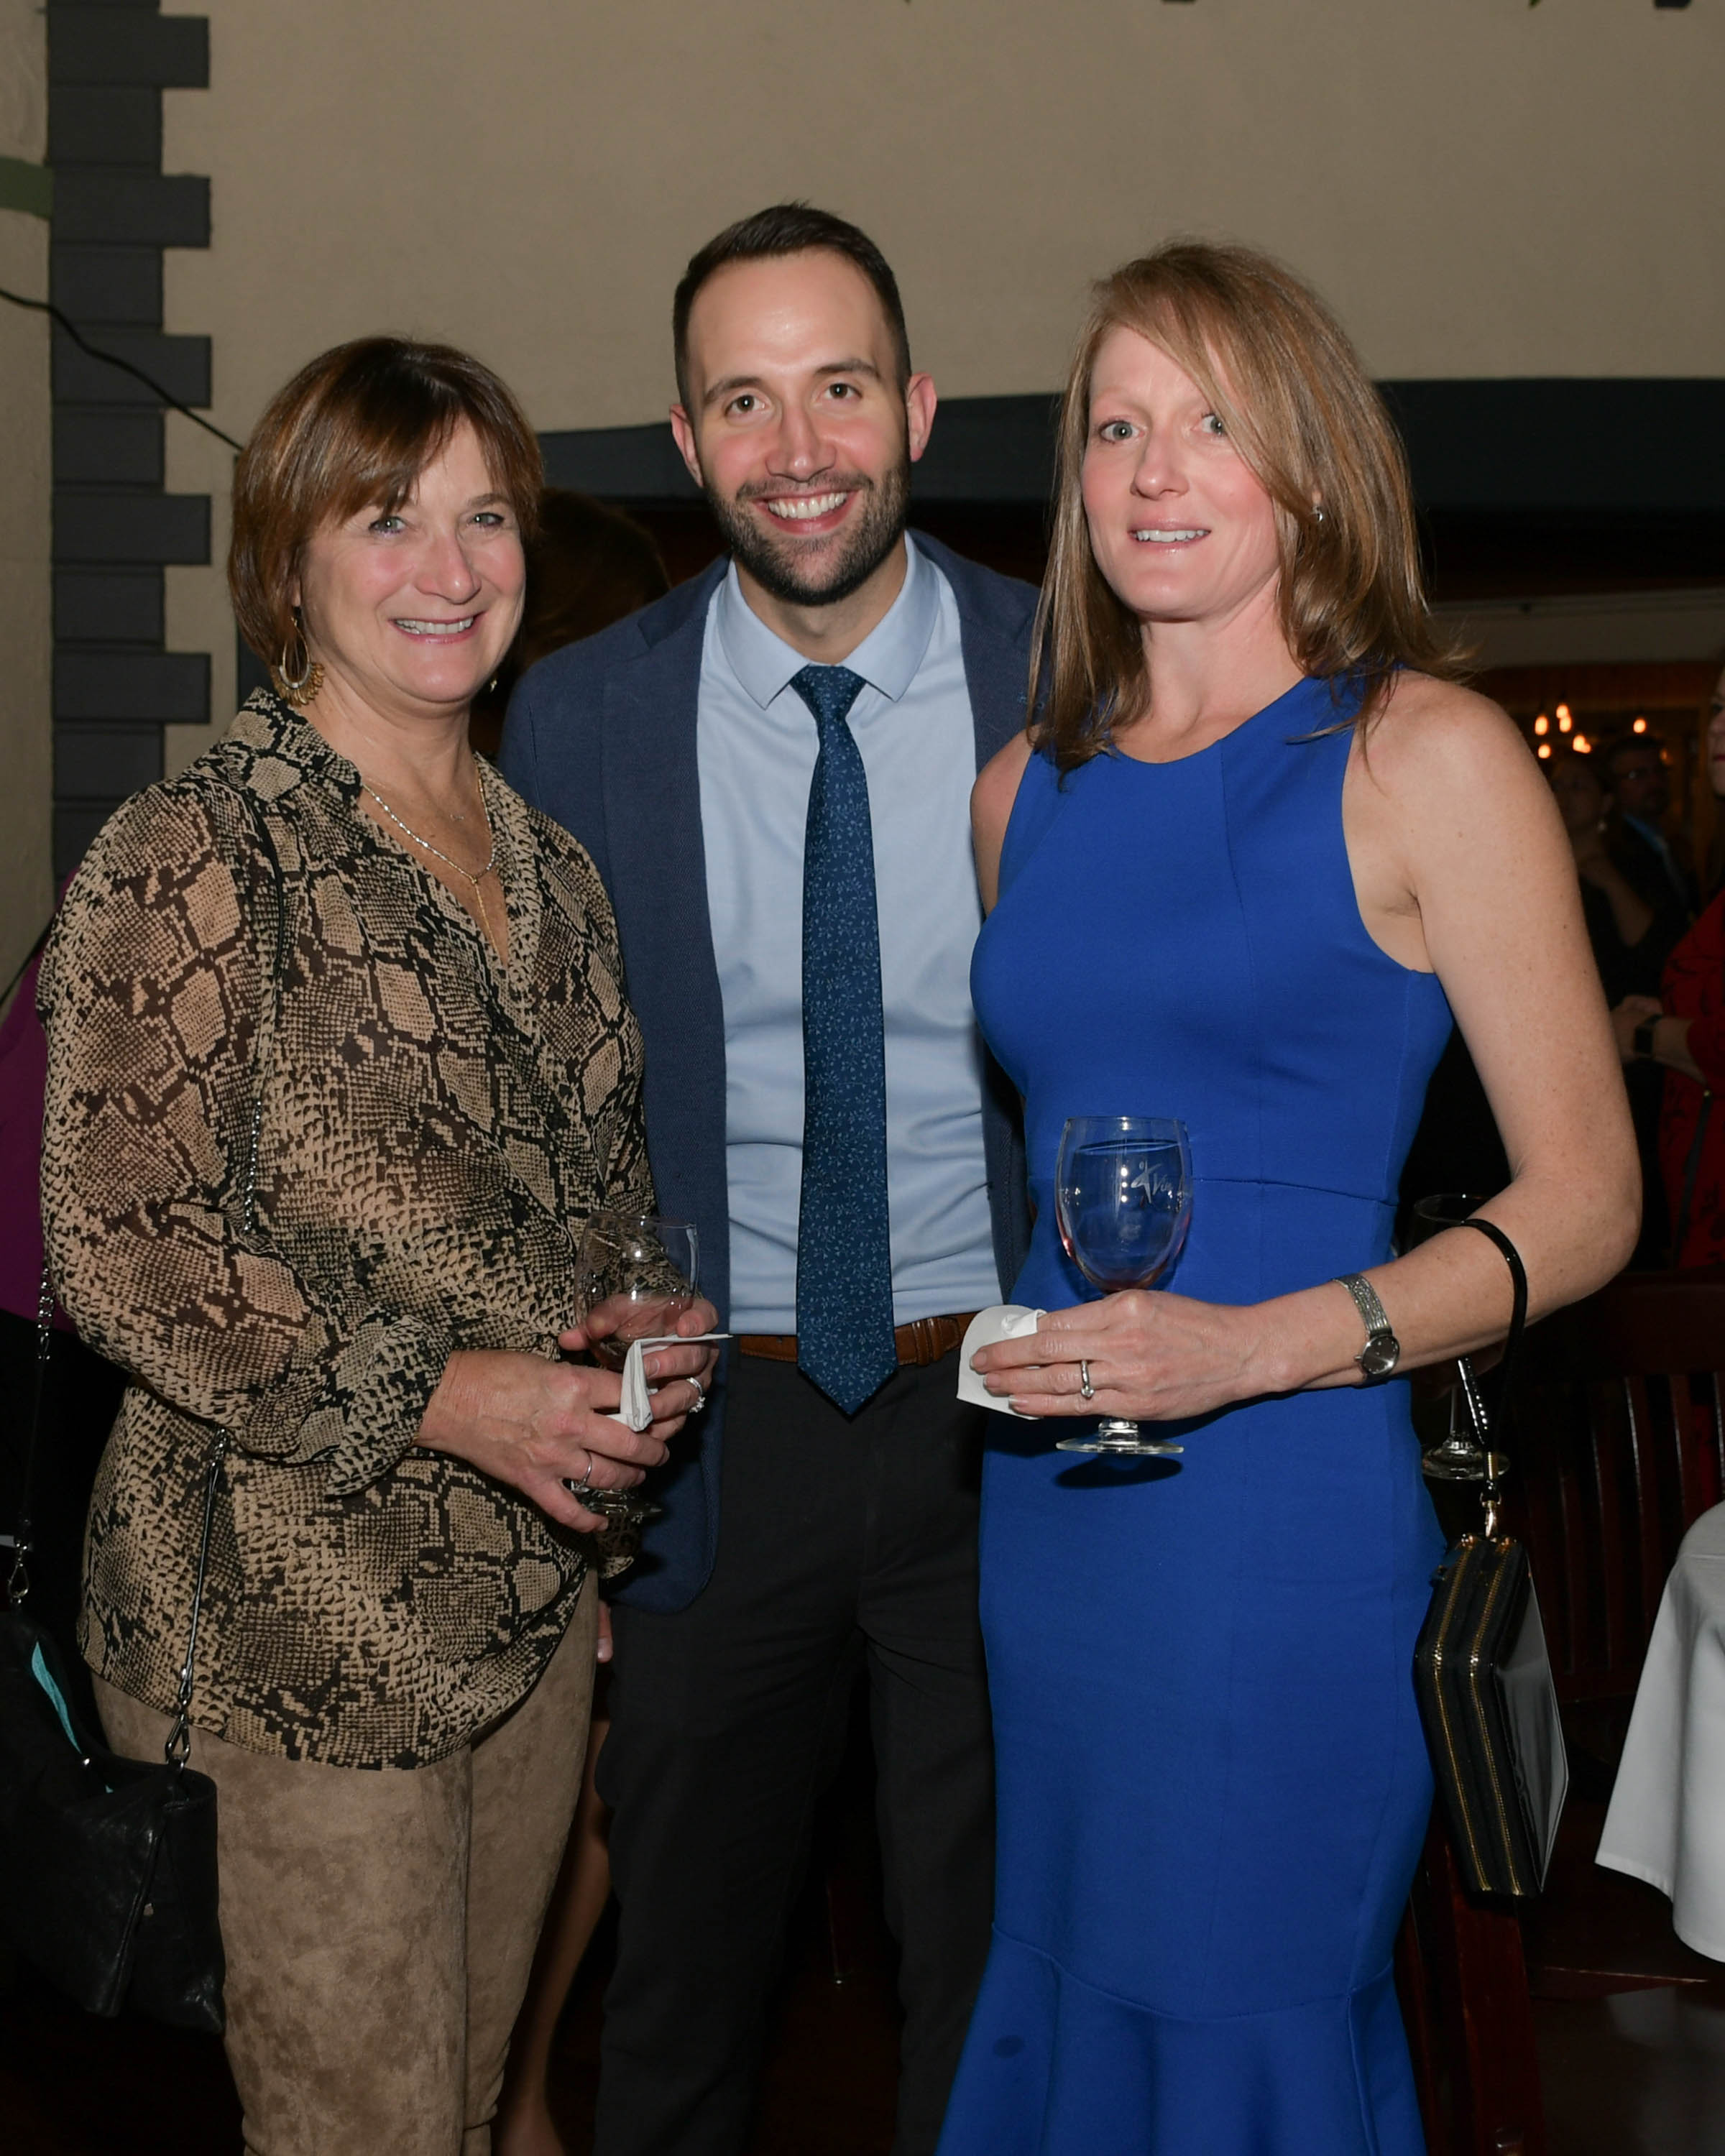 Vin Le Soir to benefit AIM Services, Inc. three people with wine